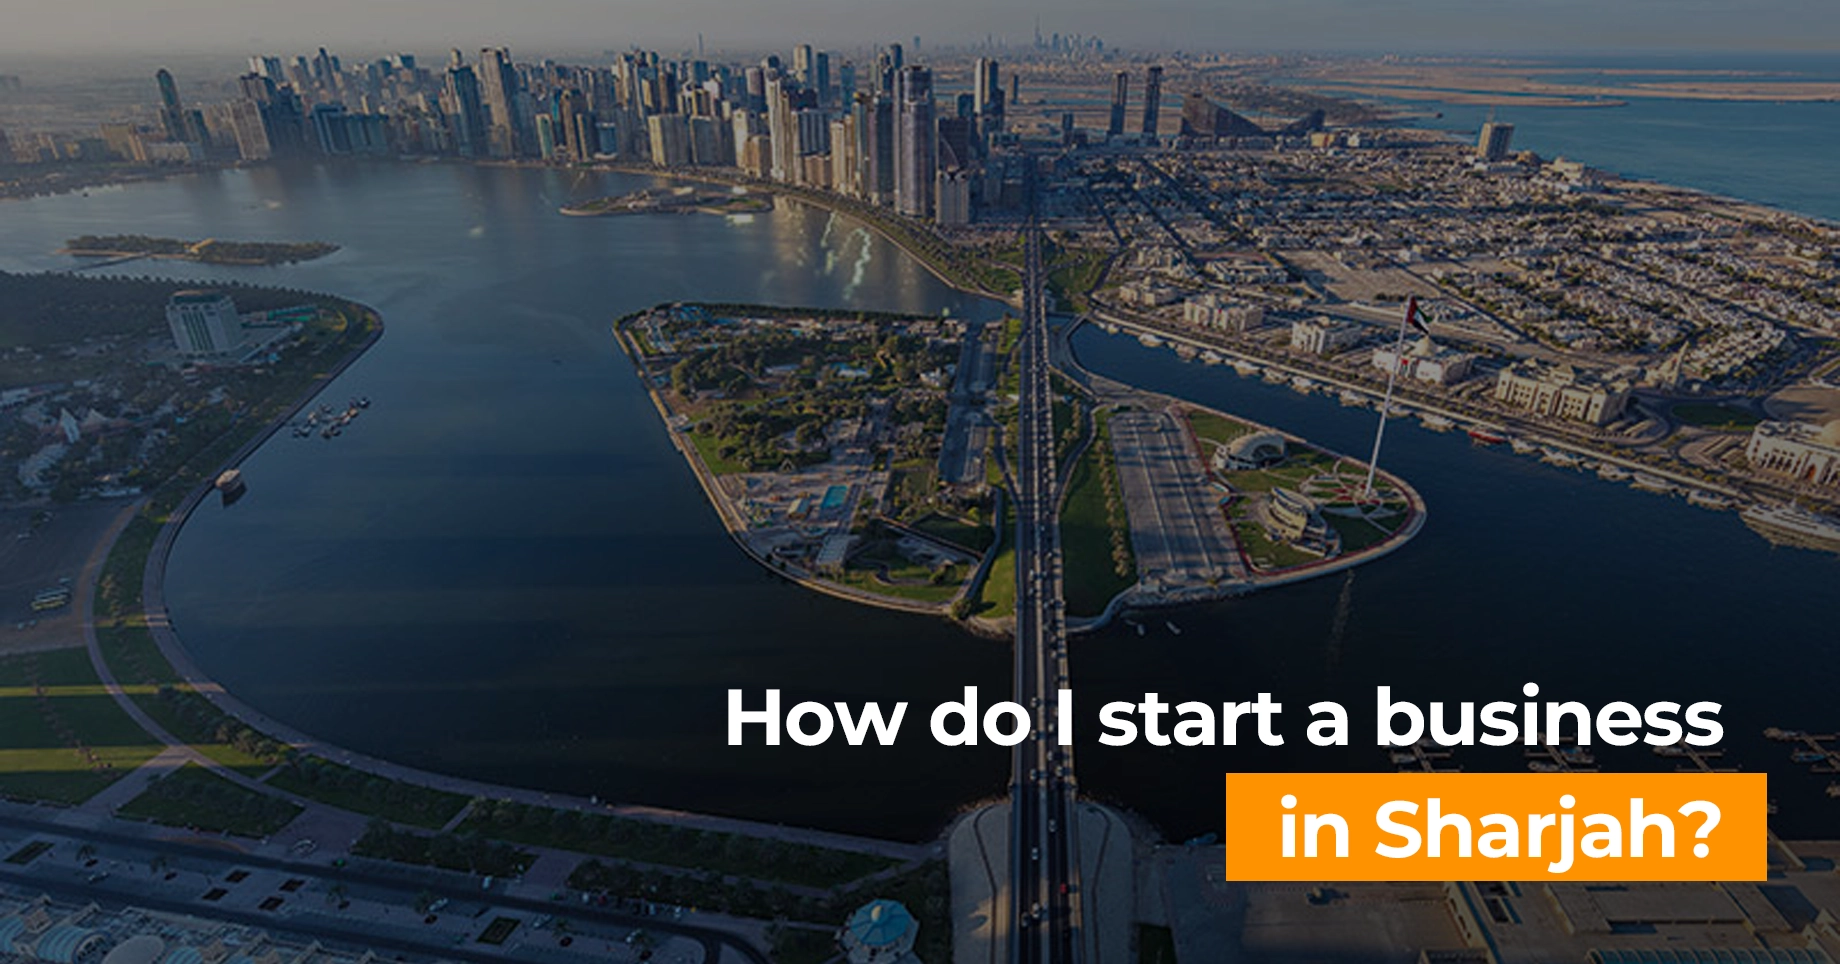 How do I start a business in Sharjah?